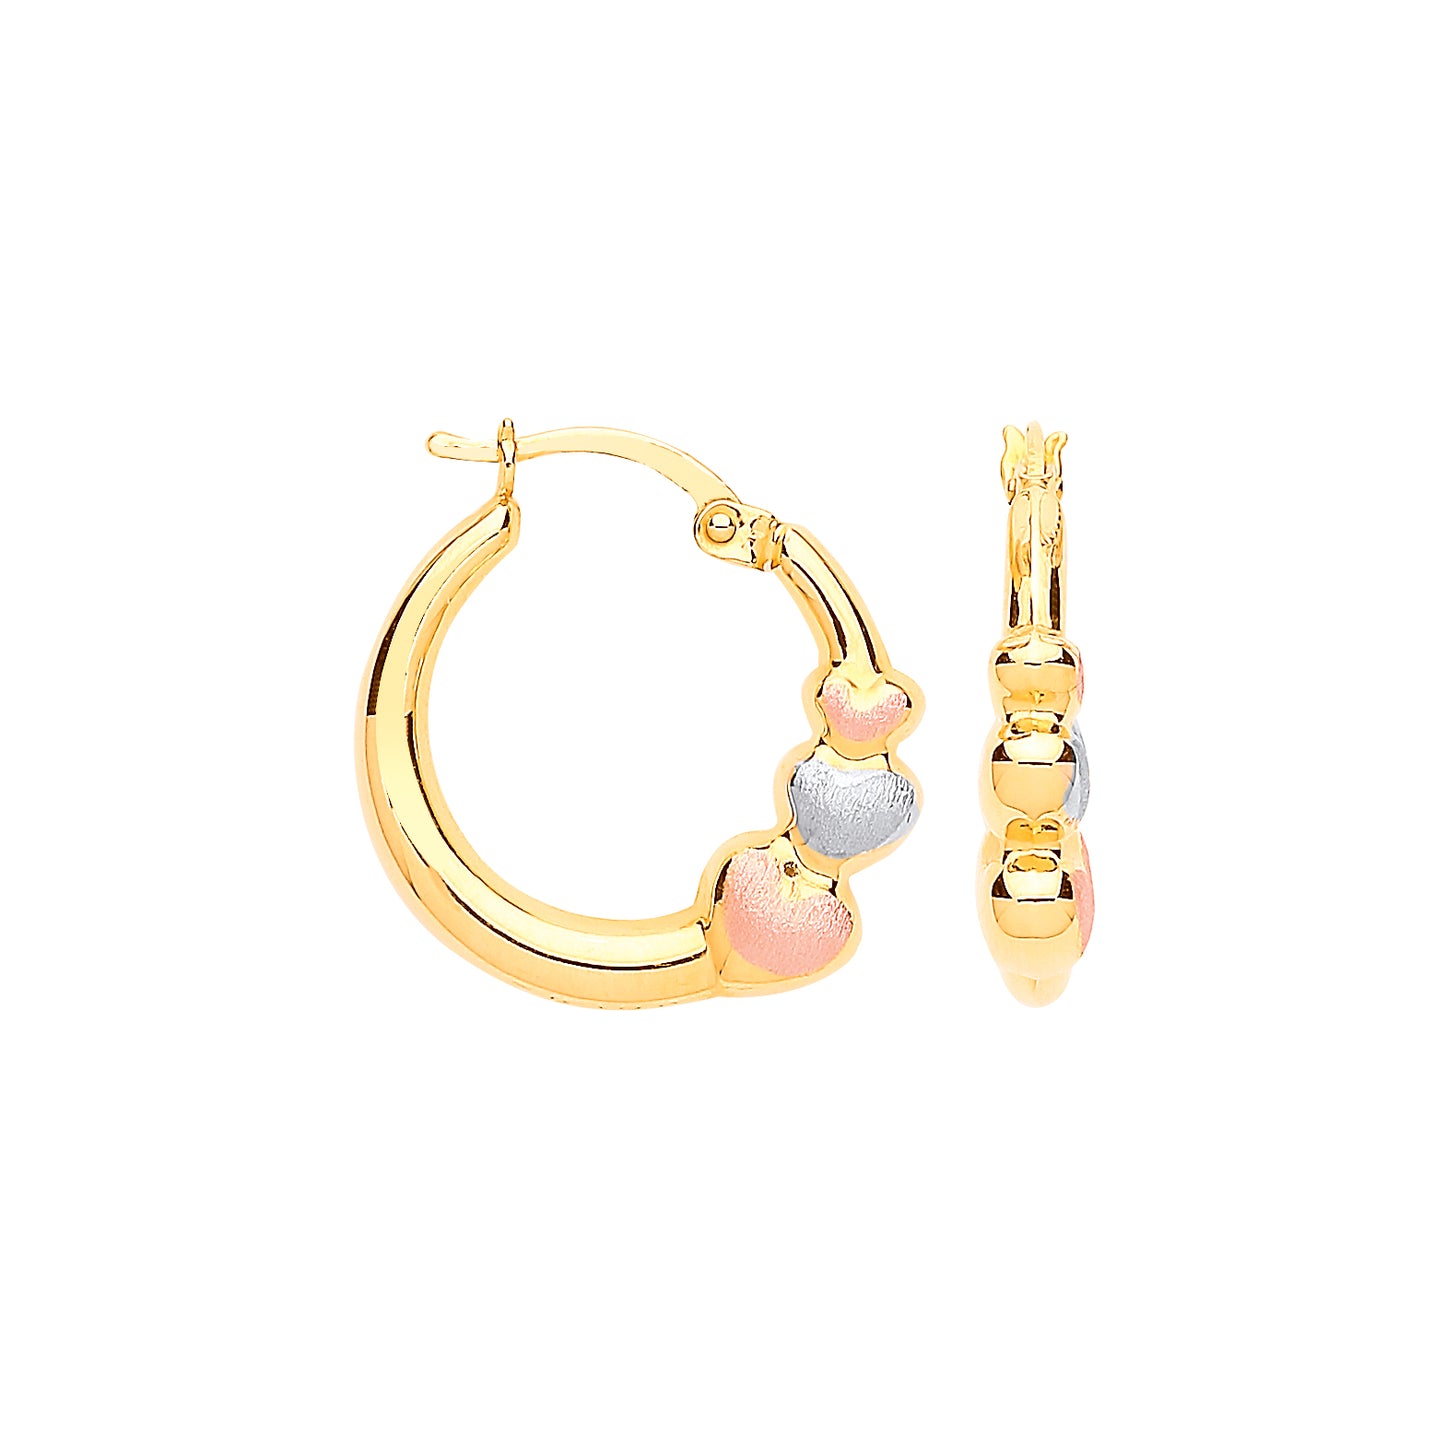 Gold with R&WG Satin Finish Hearts Hoop Earrings